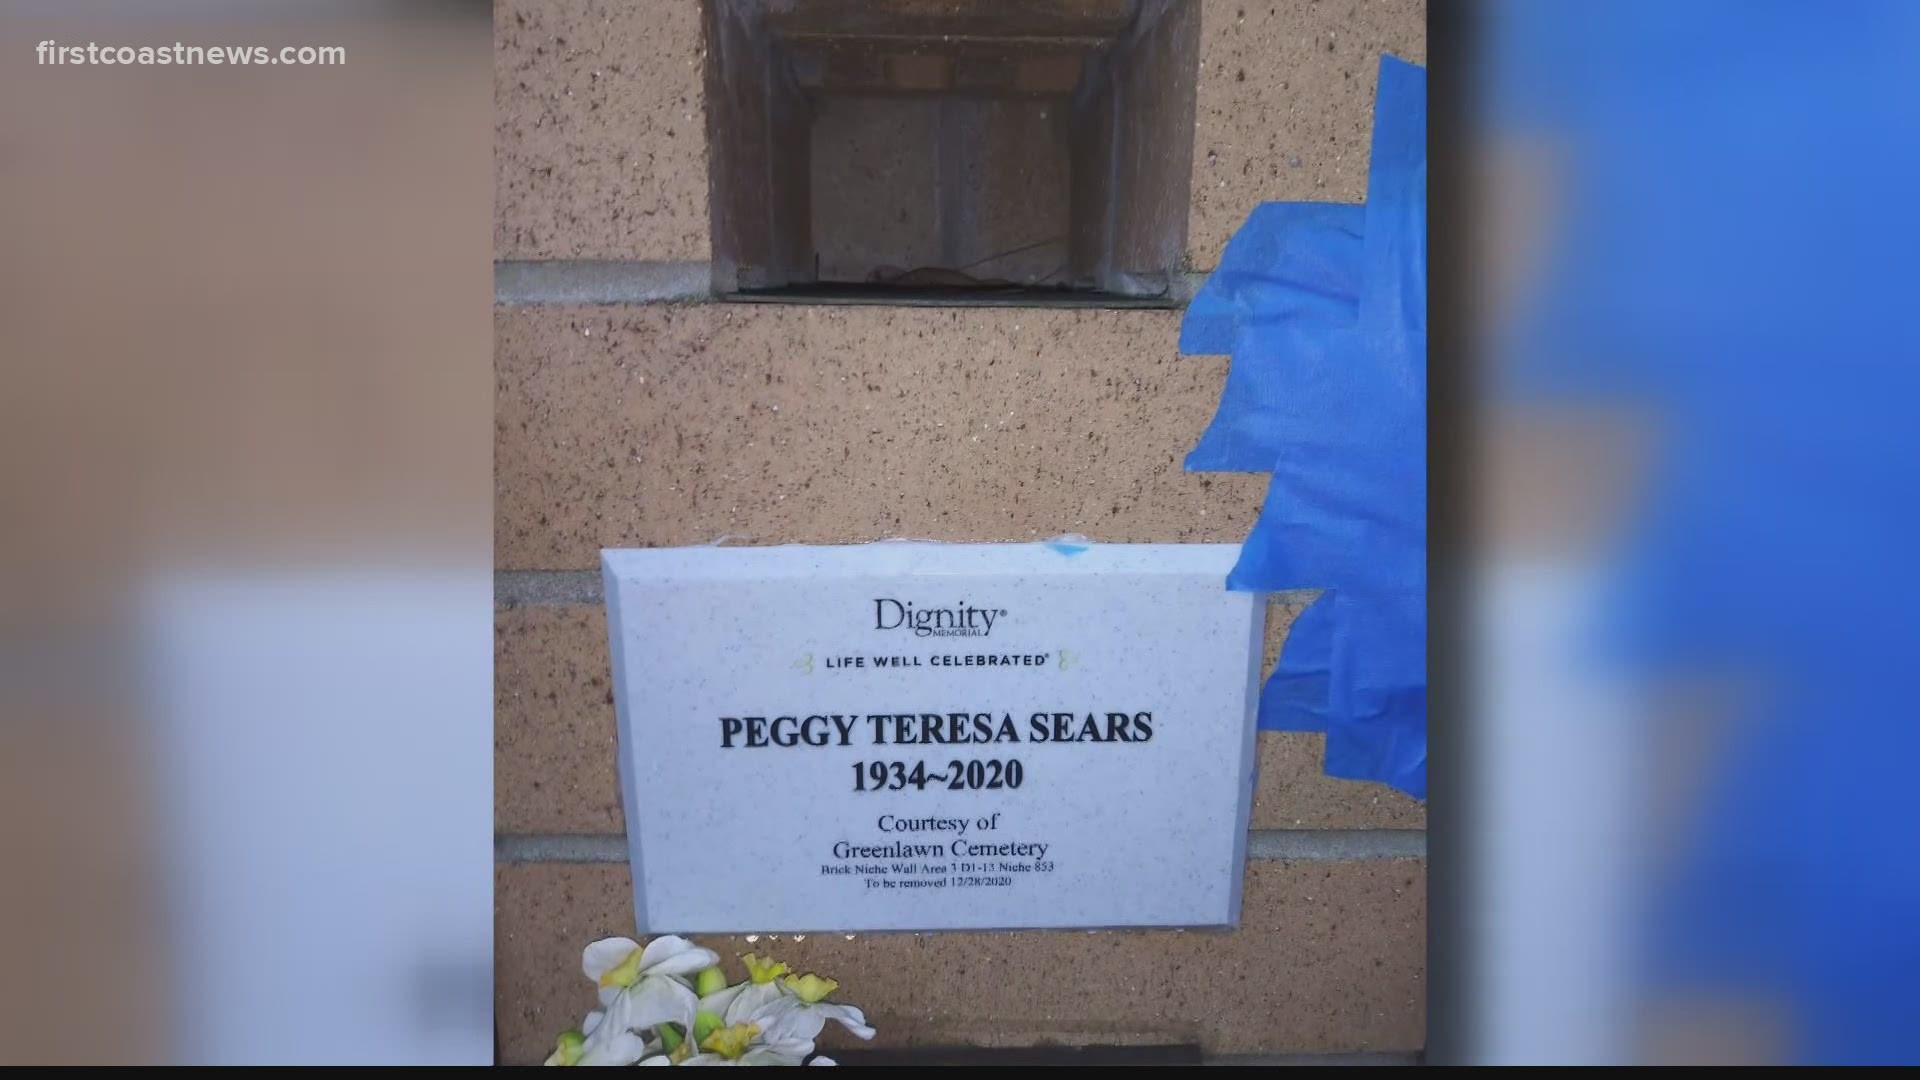 Family of Peggy Teresa Sears are mourning for a second time after someone broke into Greenlawn Cemetery and stole her ashes.